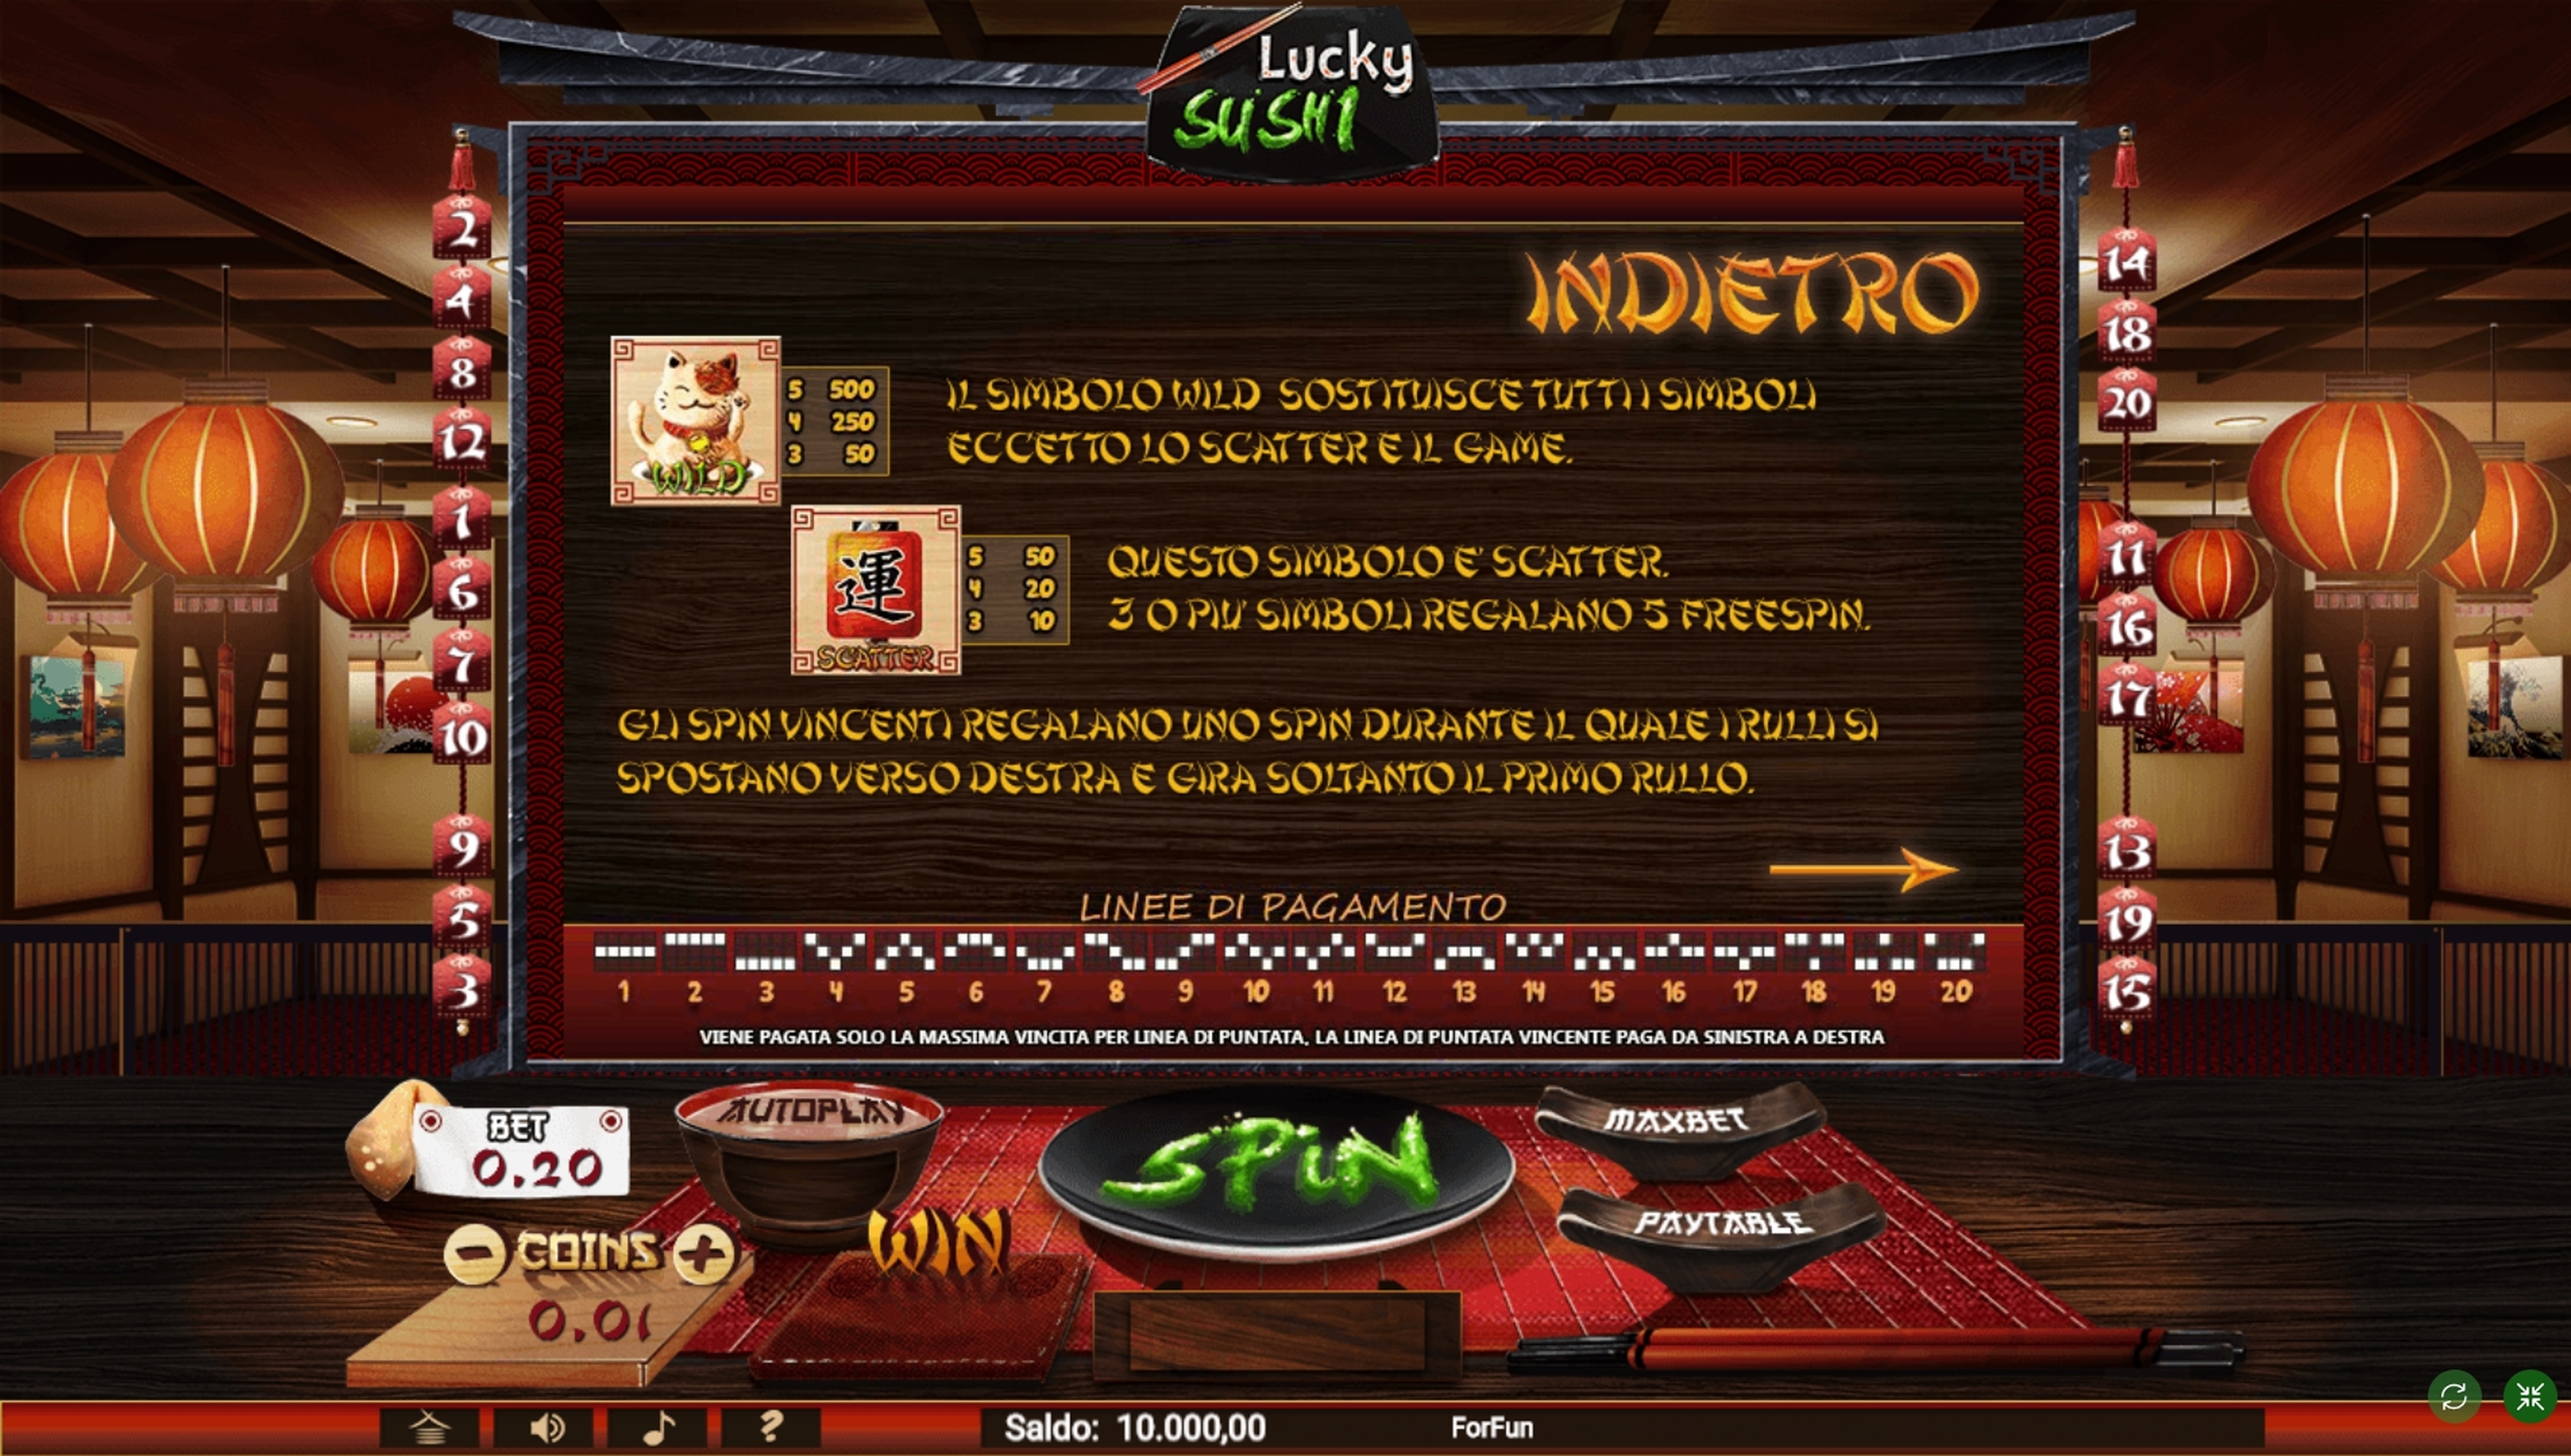 Info of Lucky Sushi Slot Game by Tuko Productions